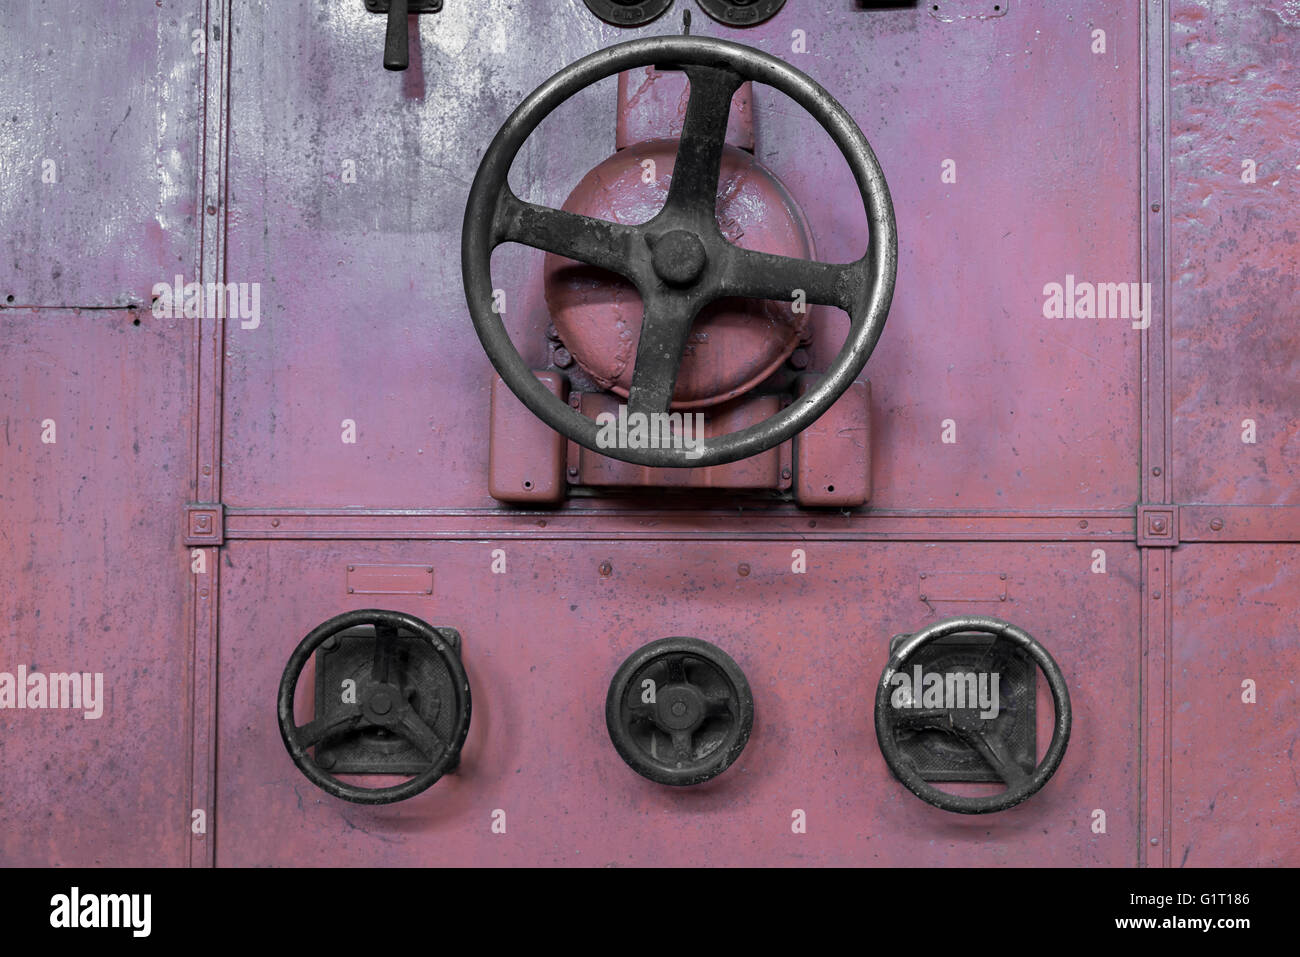 Rotary Control Switches on old engine Stock Photo